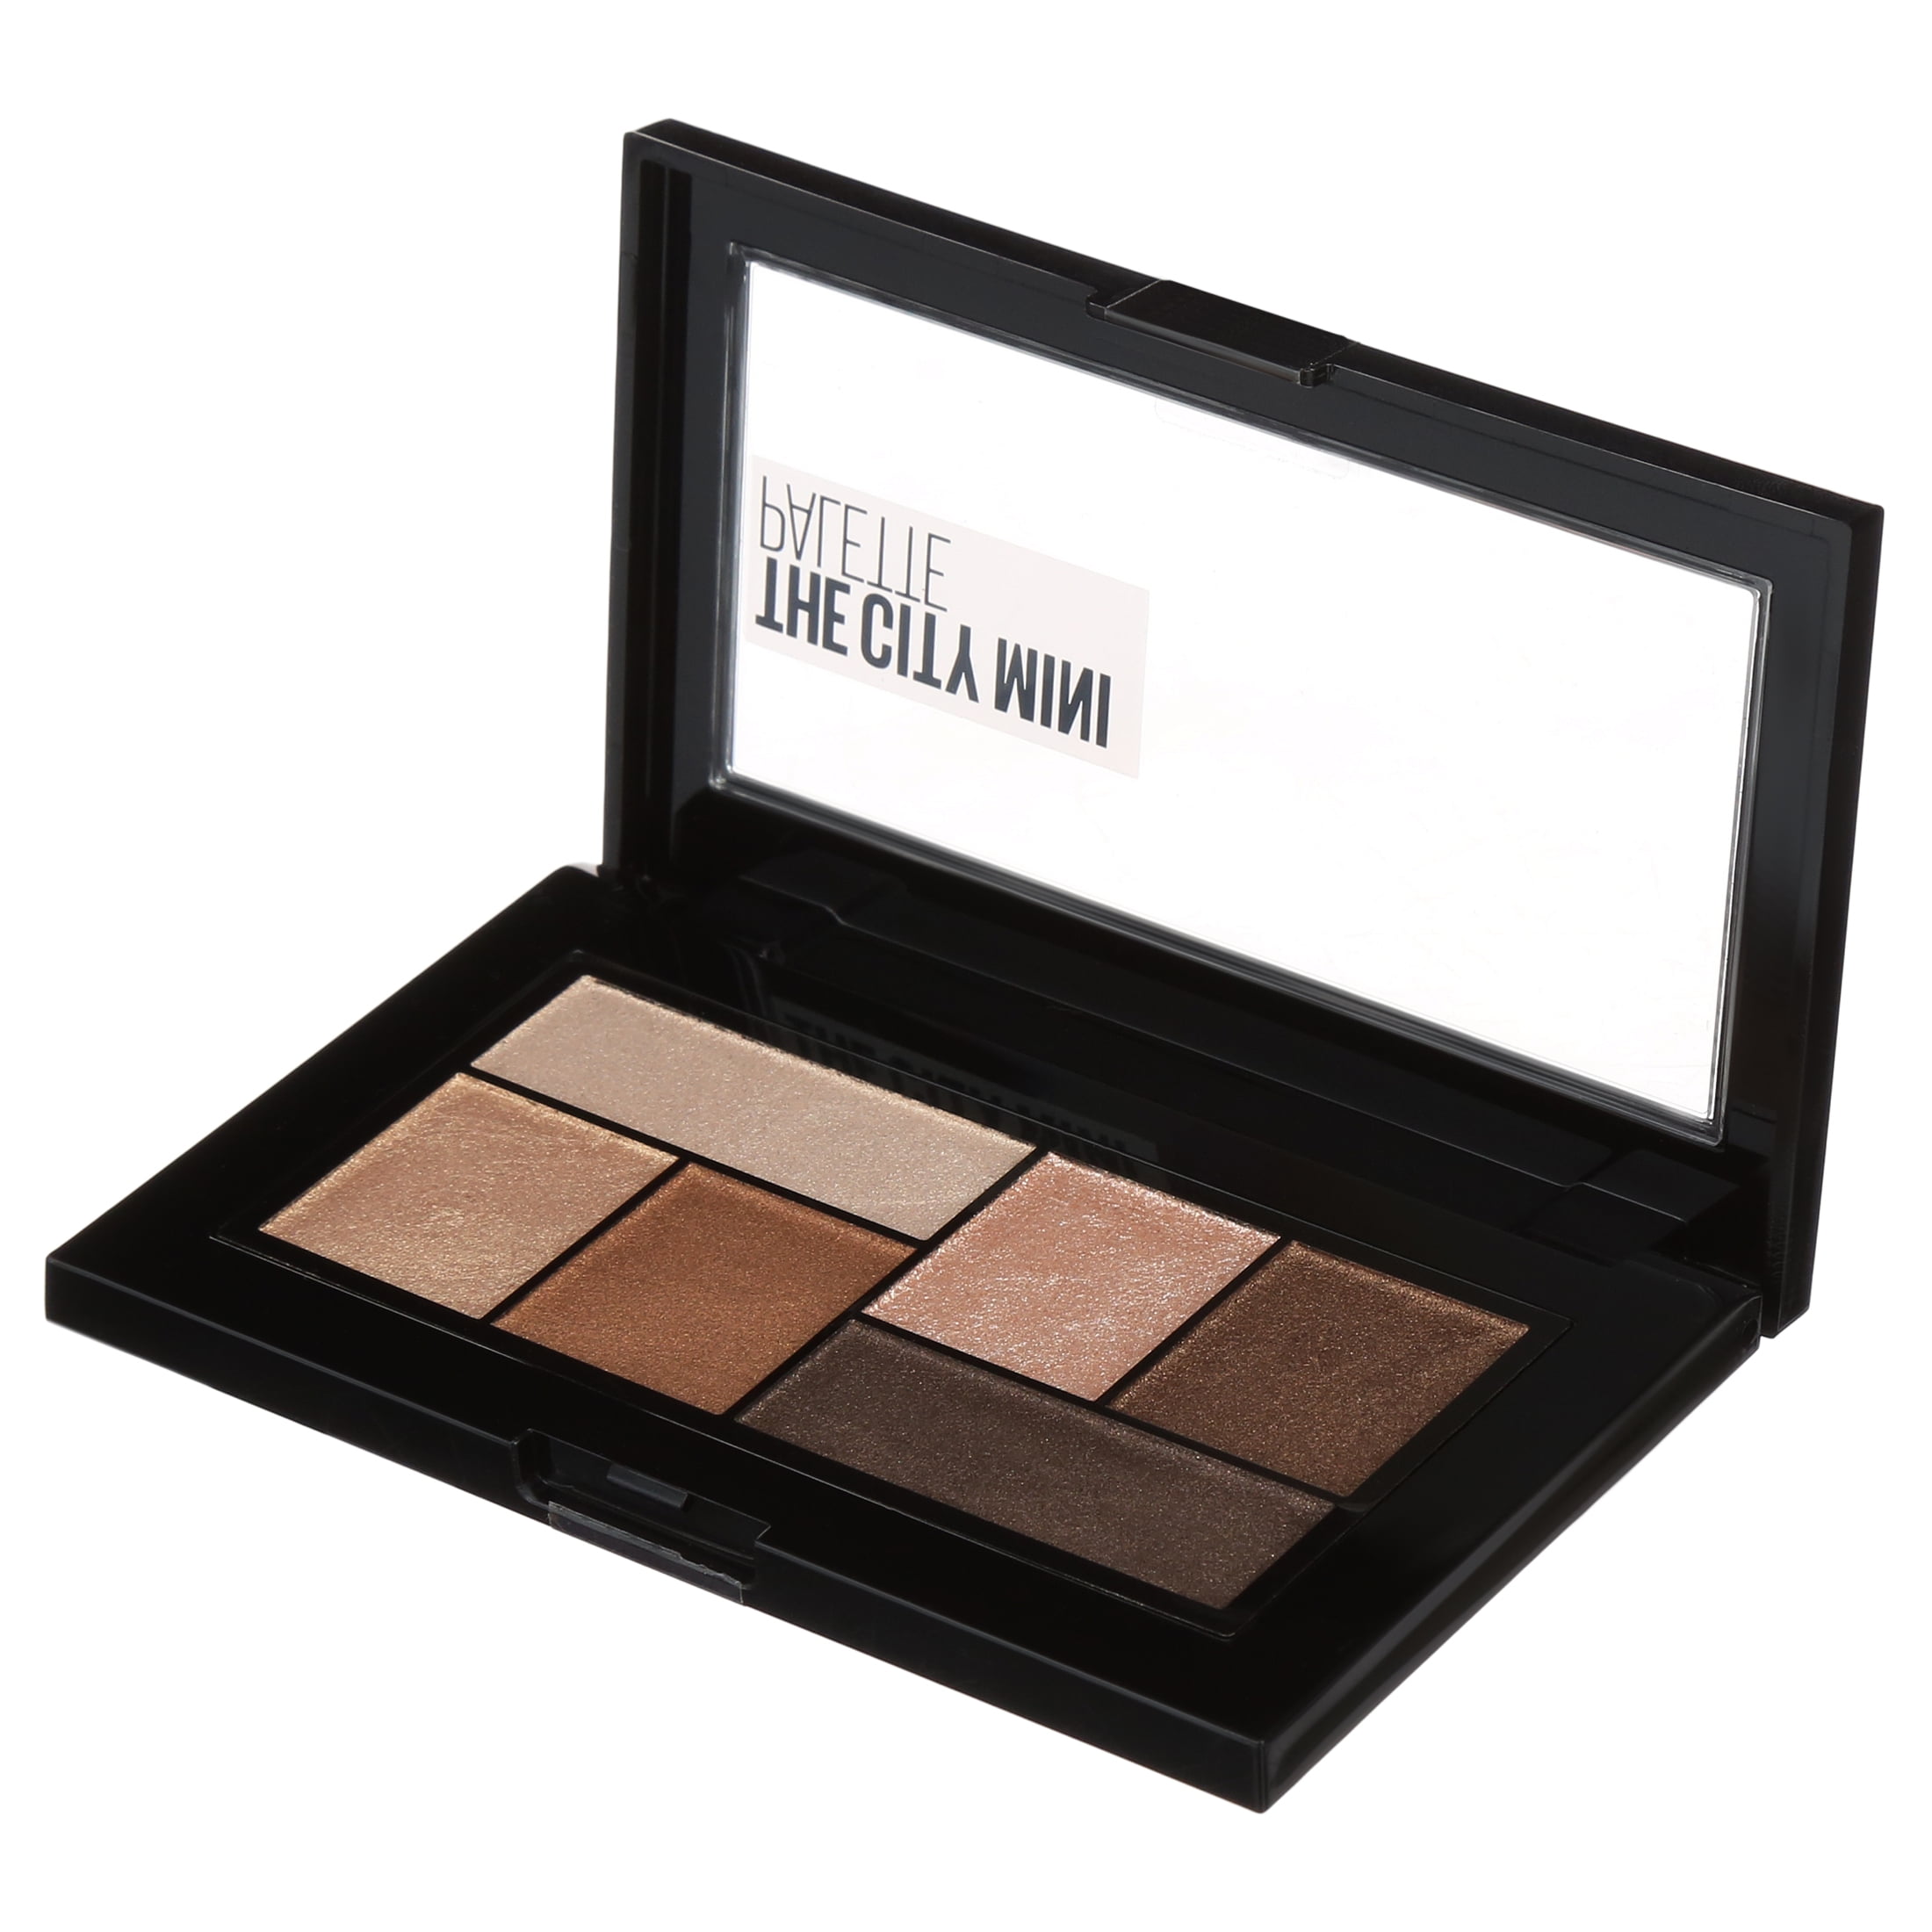 Palette Eyeshadow Mini Rooftop City The Maybelline Makeup, Bronzes